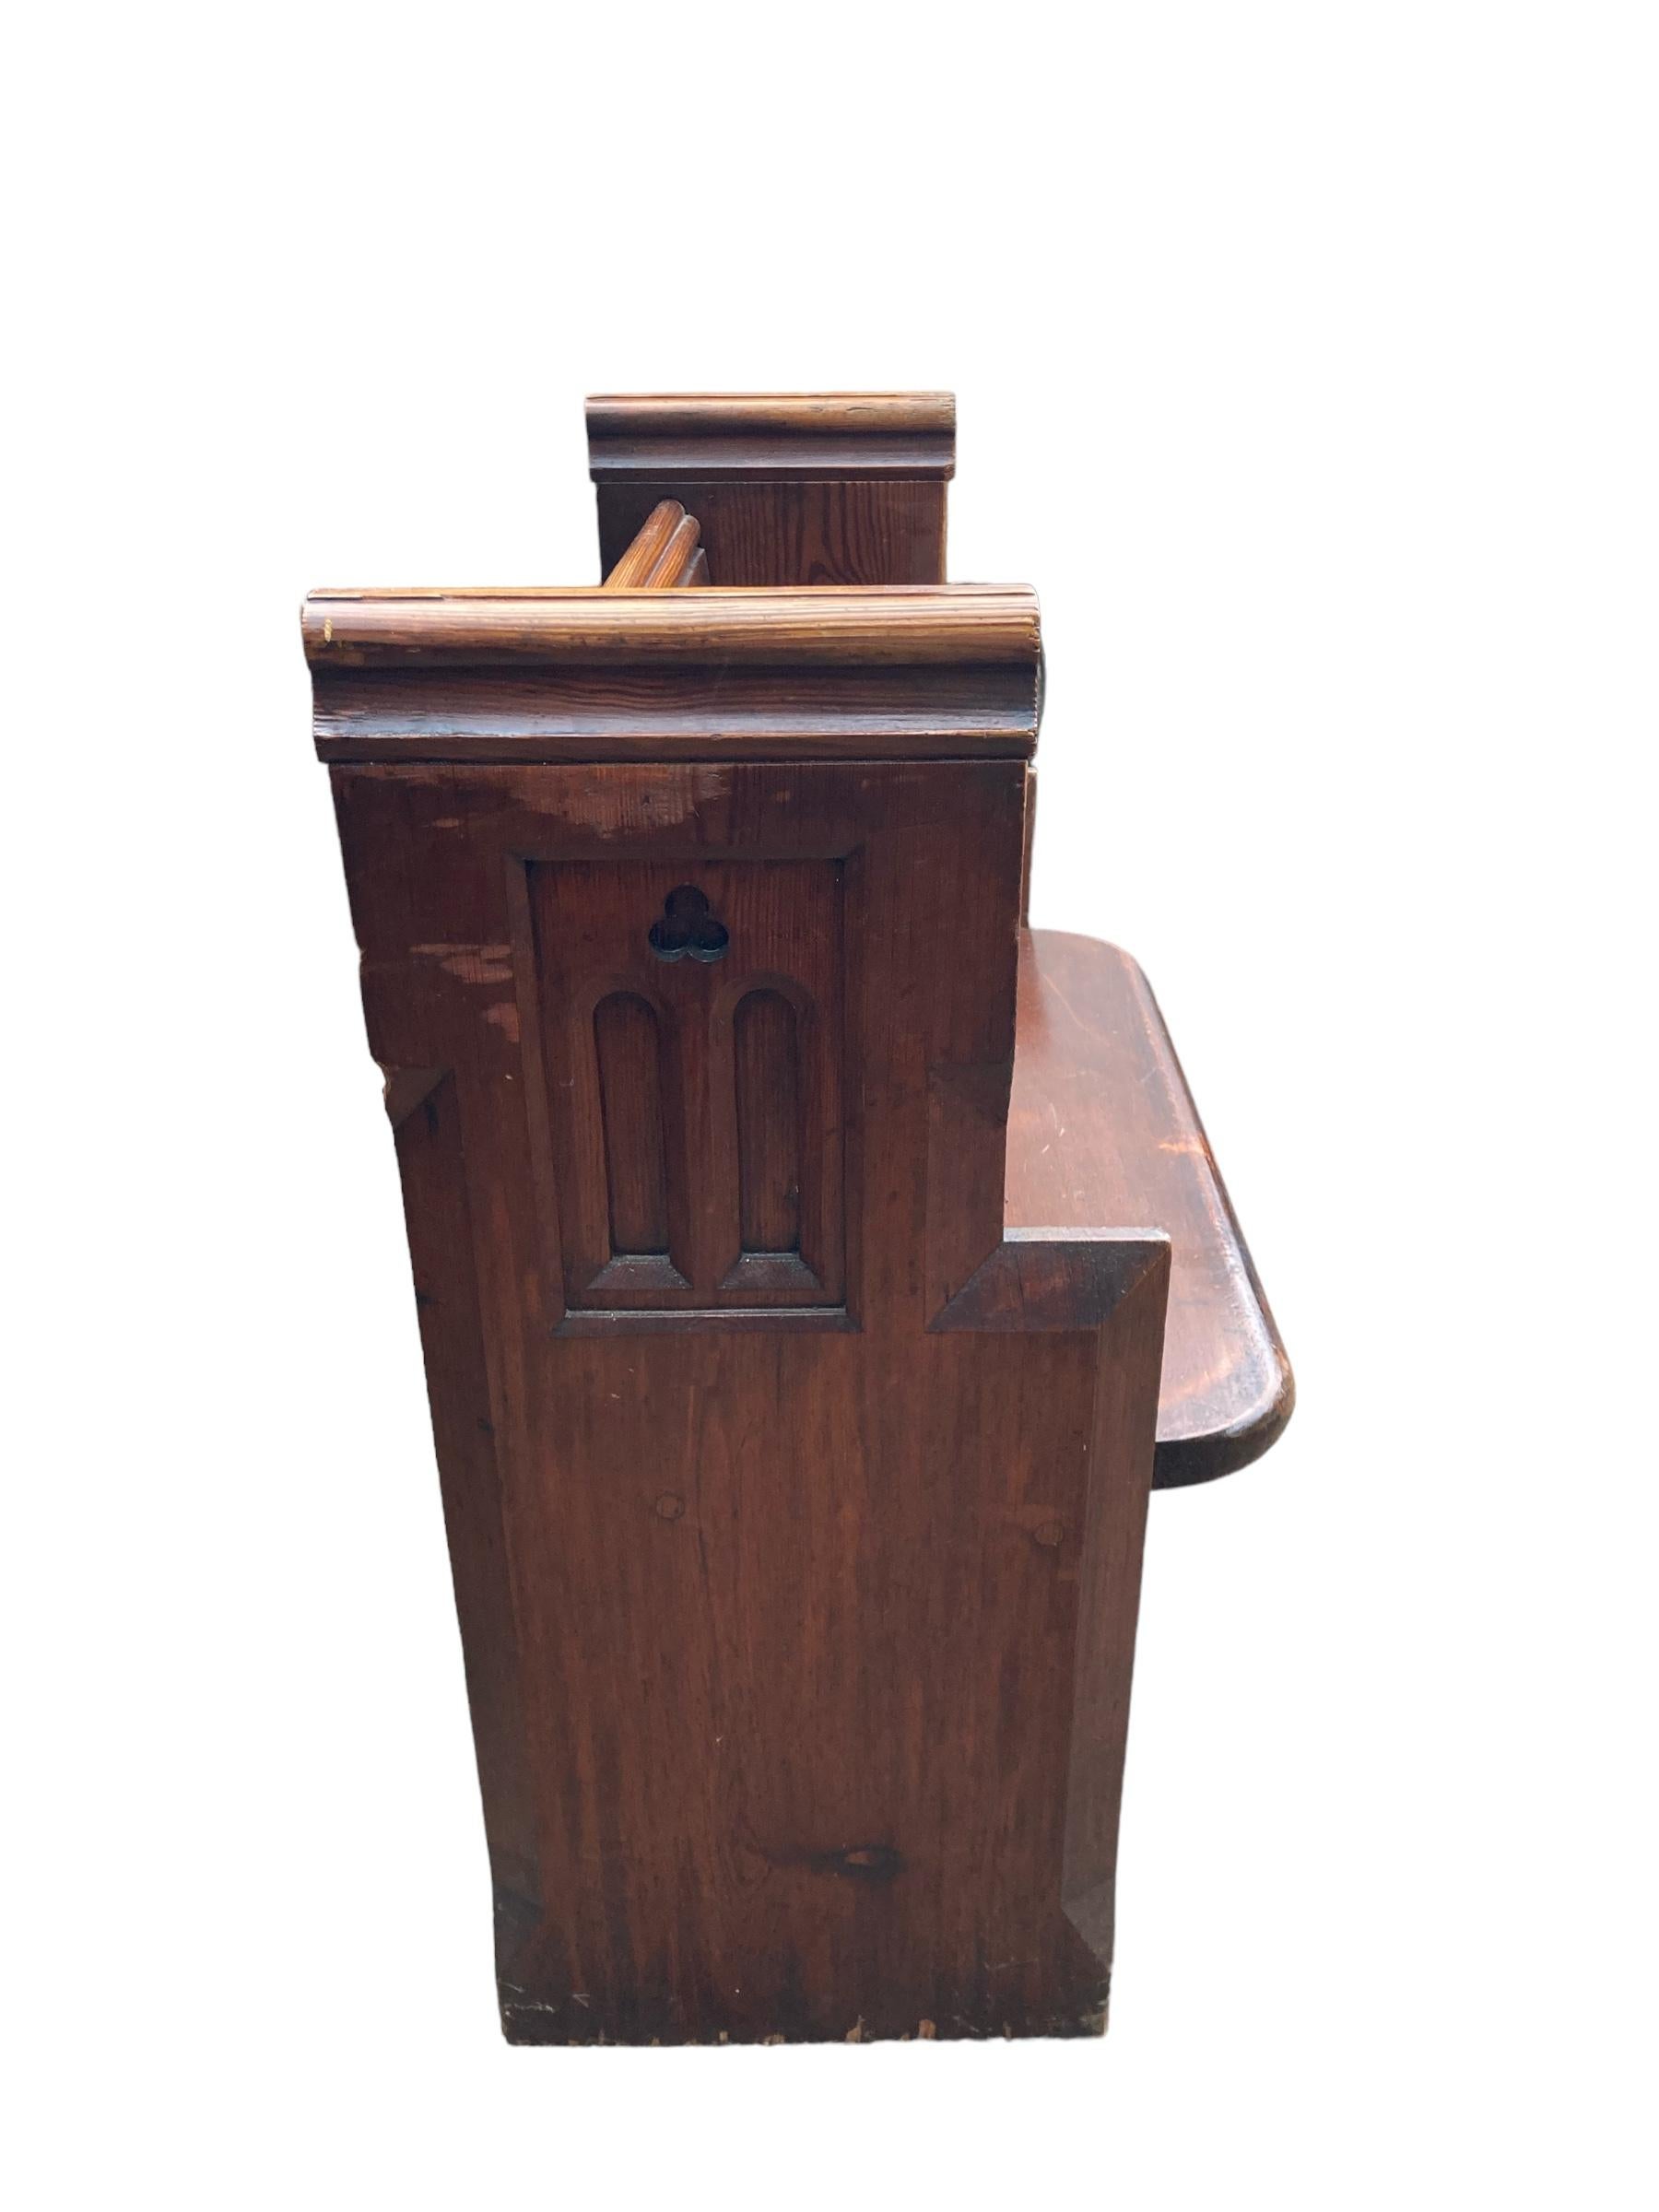 20th Century Antique Oak Gothic style Church pew in Original Conditionwith numbers 44 on side